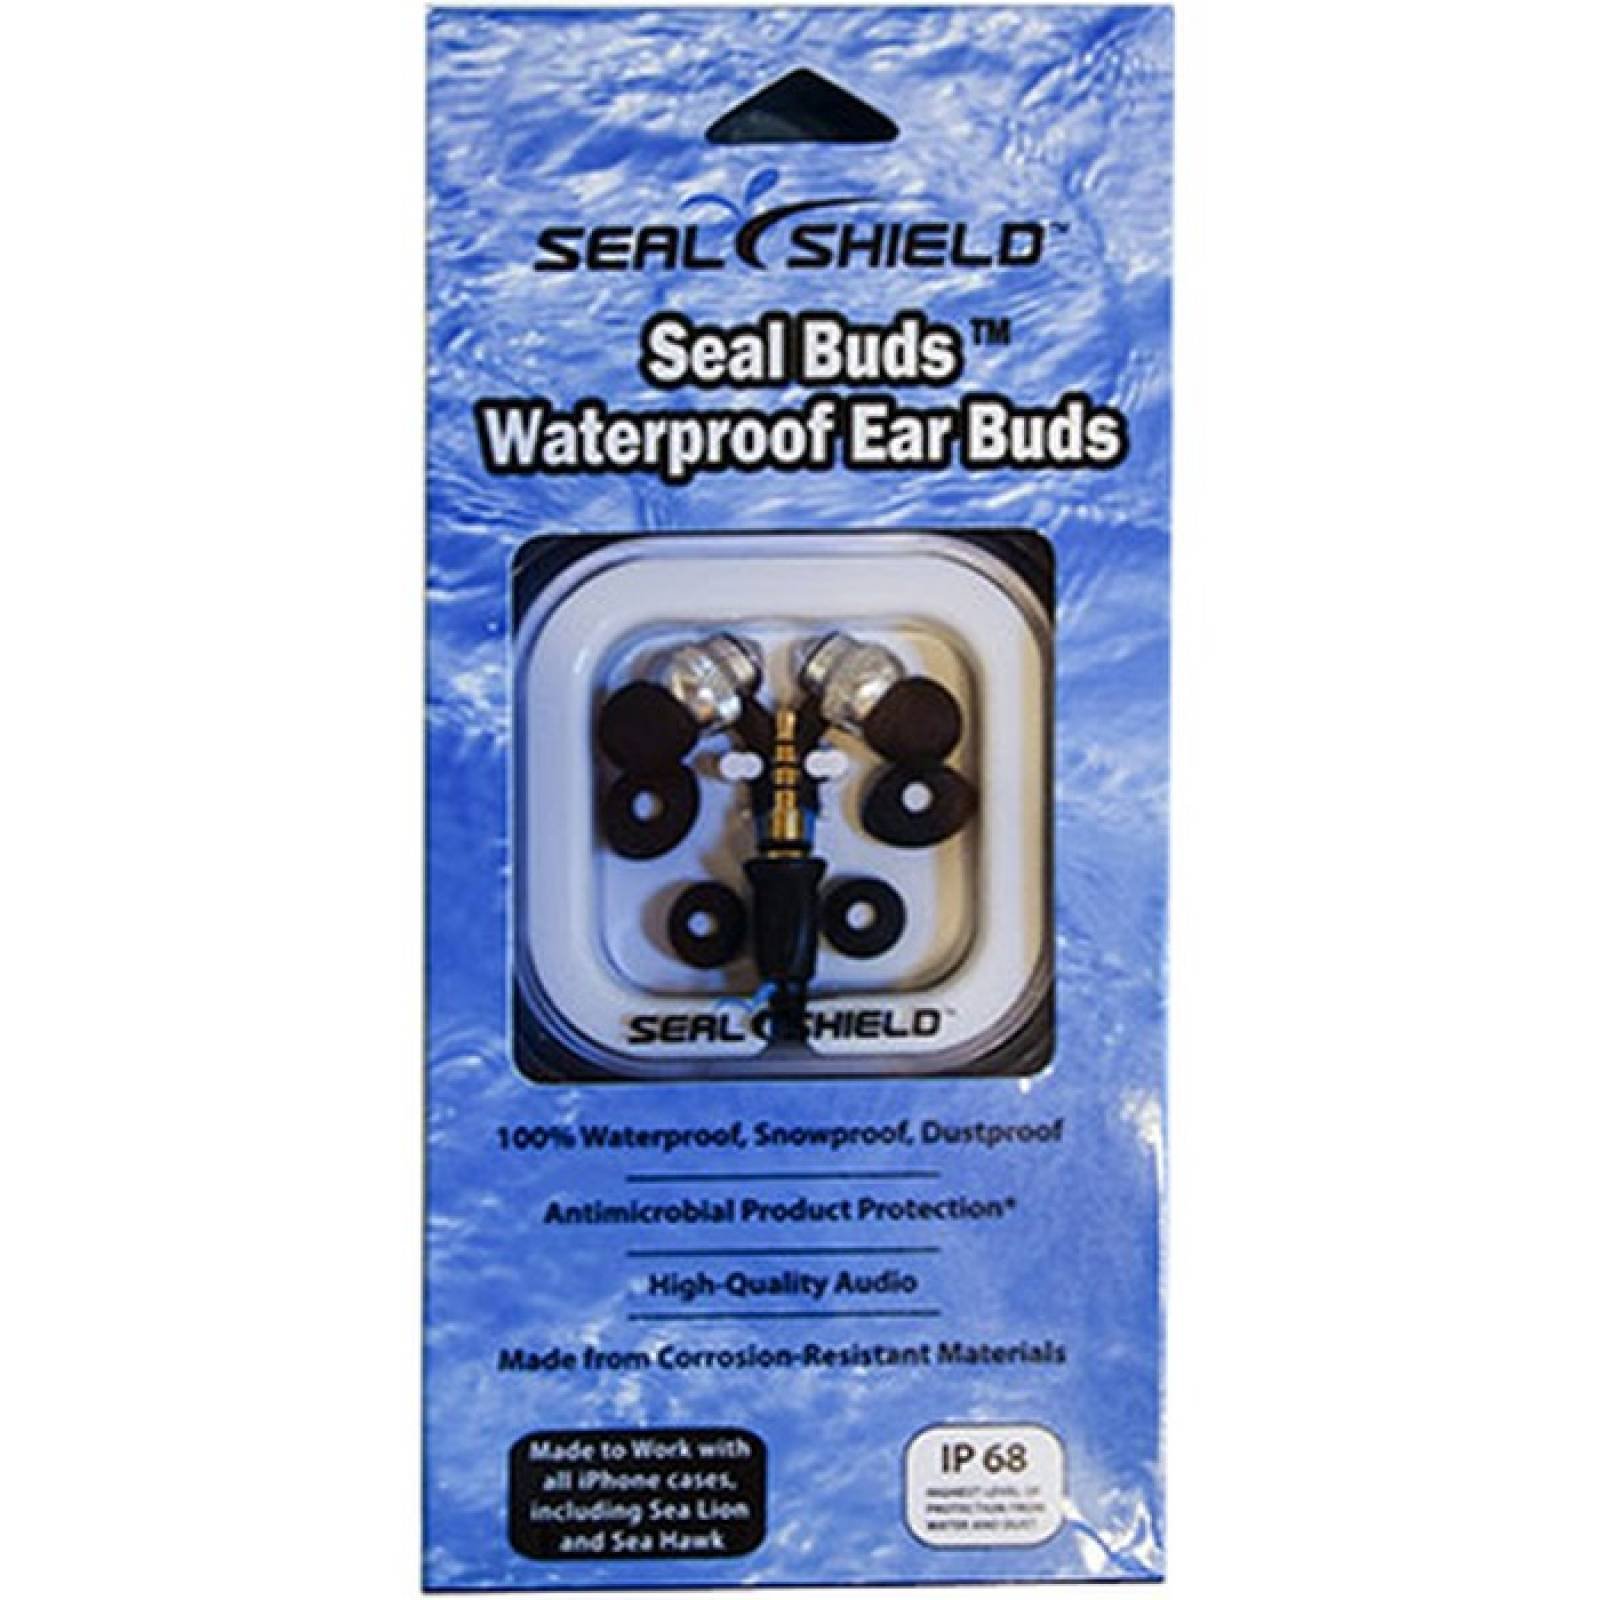 Seal Shield Seal Buds Auriculares sin micrfono